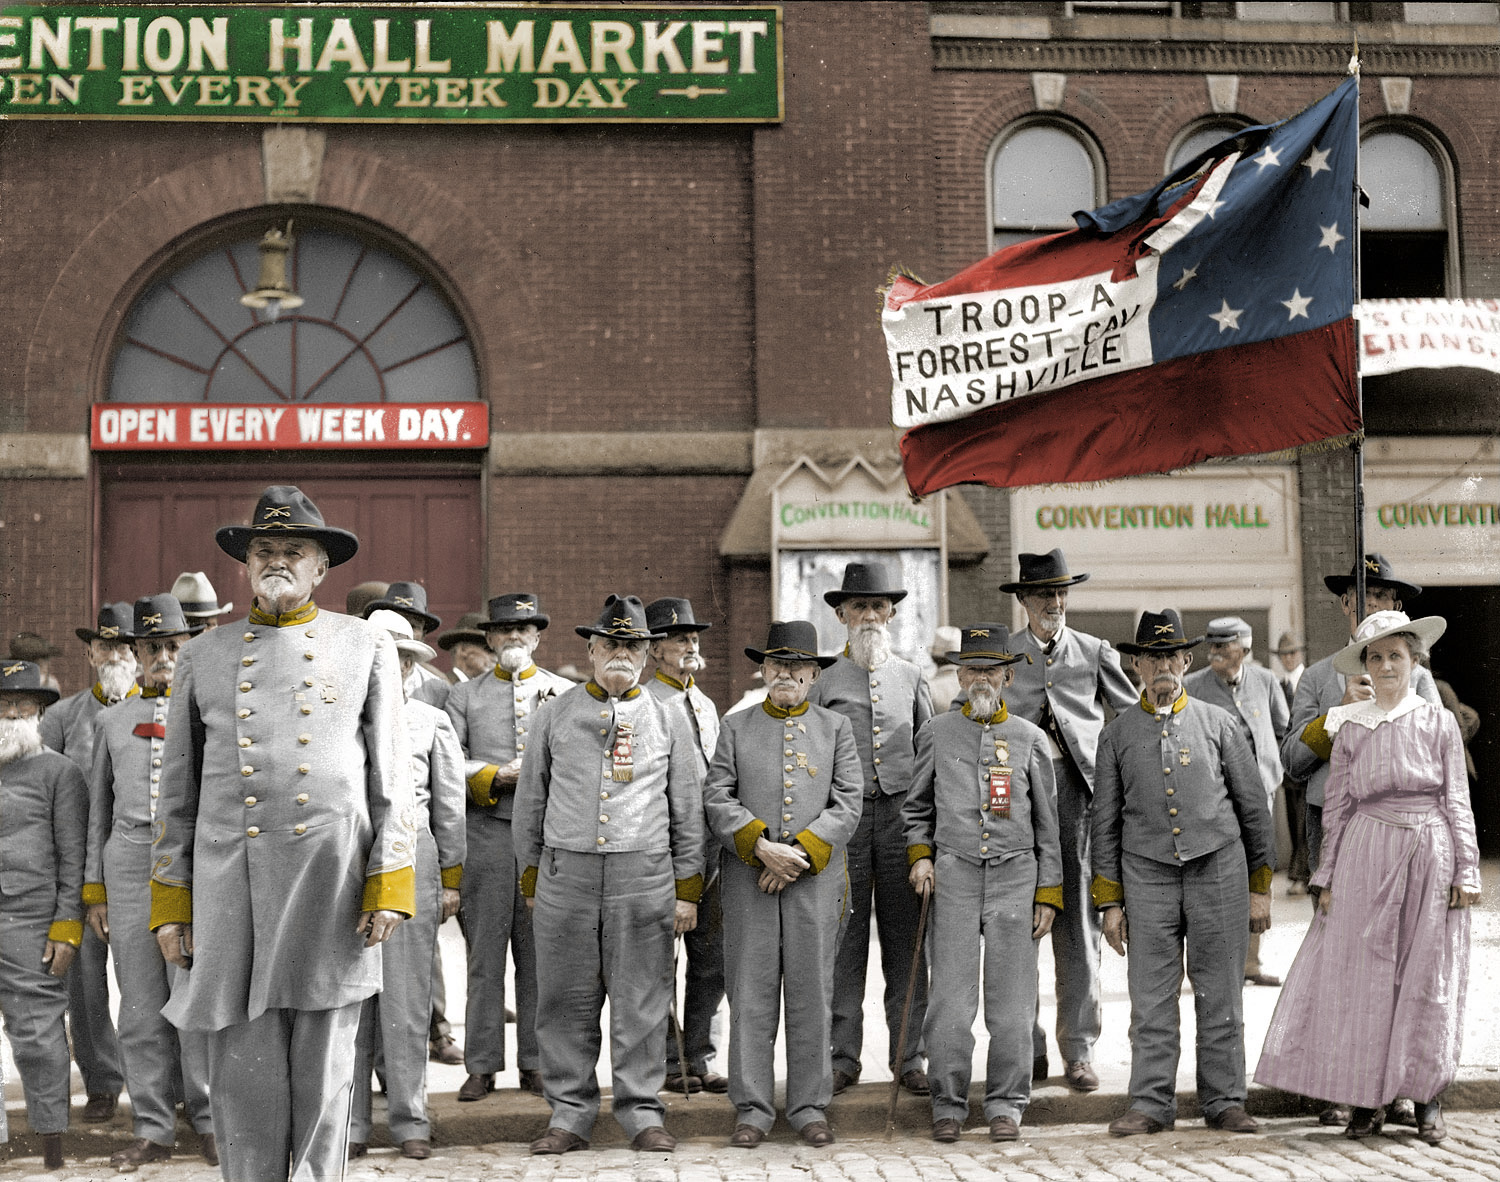 Colorized from original on Shorpy. View full size.